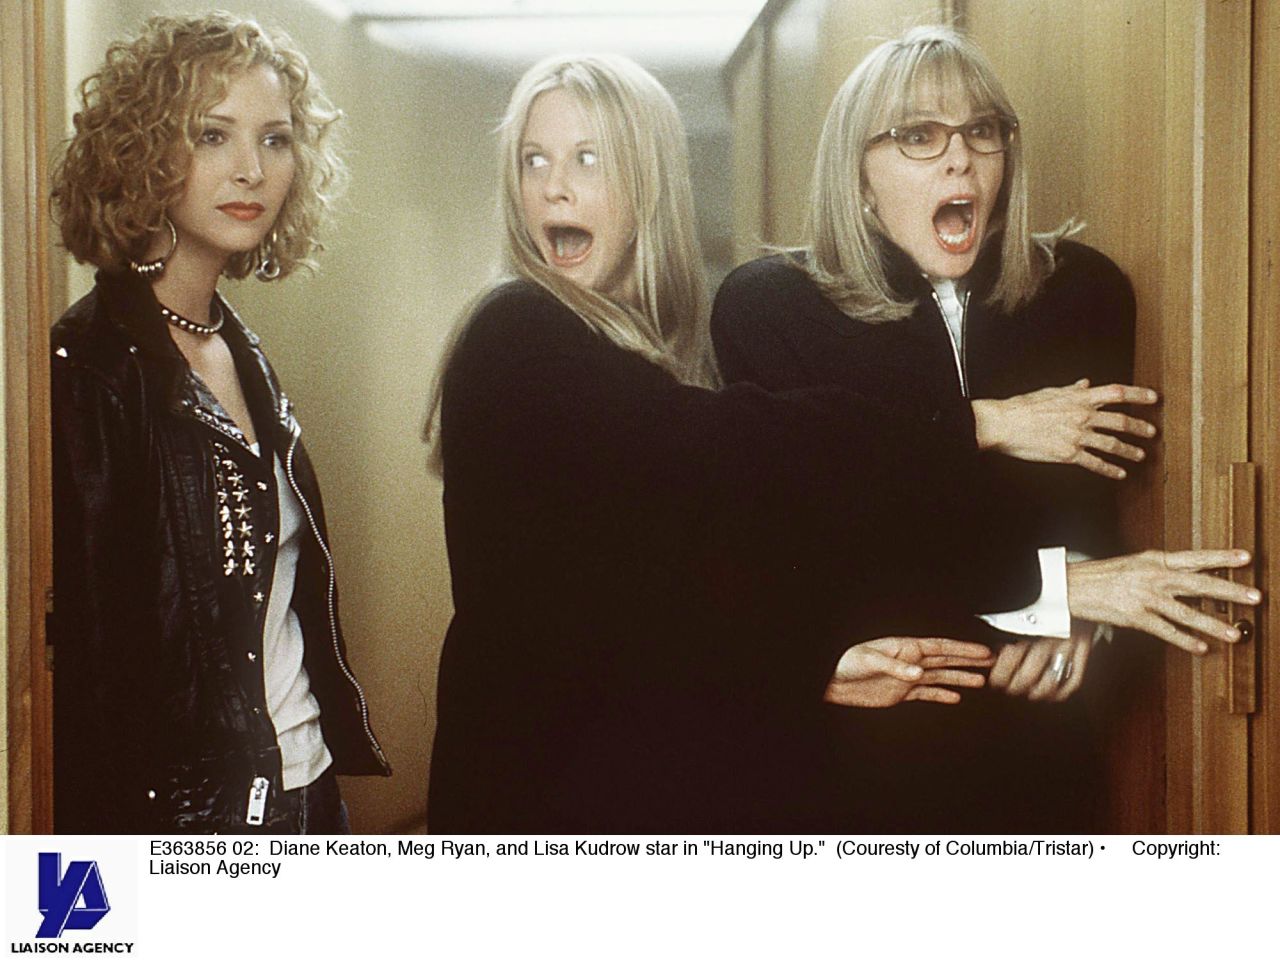 Lisa Kudrow, from left, Meg Ryan, and Diane Keaton starred in "Hanging Up," co-written by Delia Ephron.